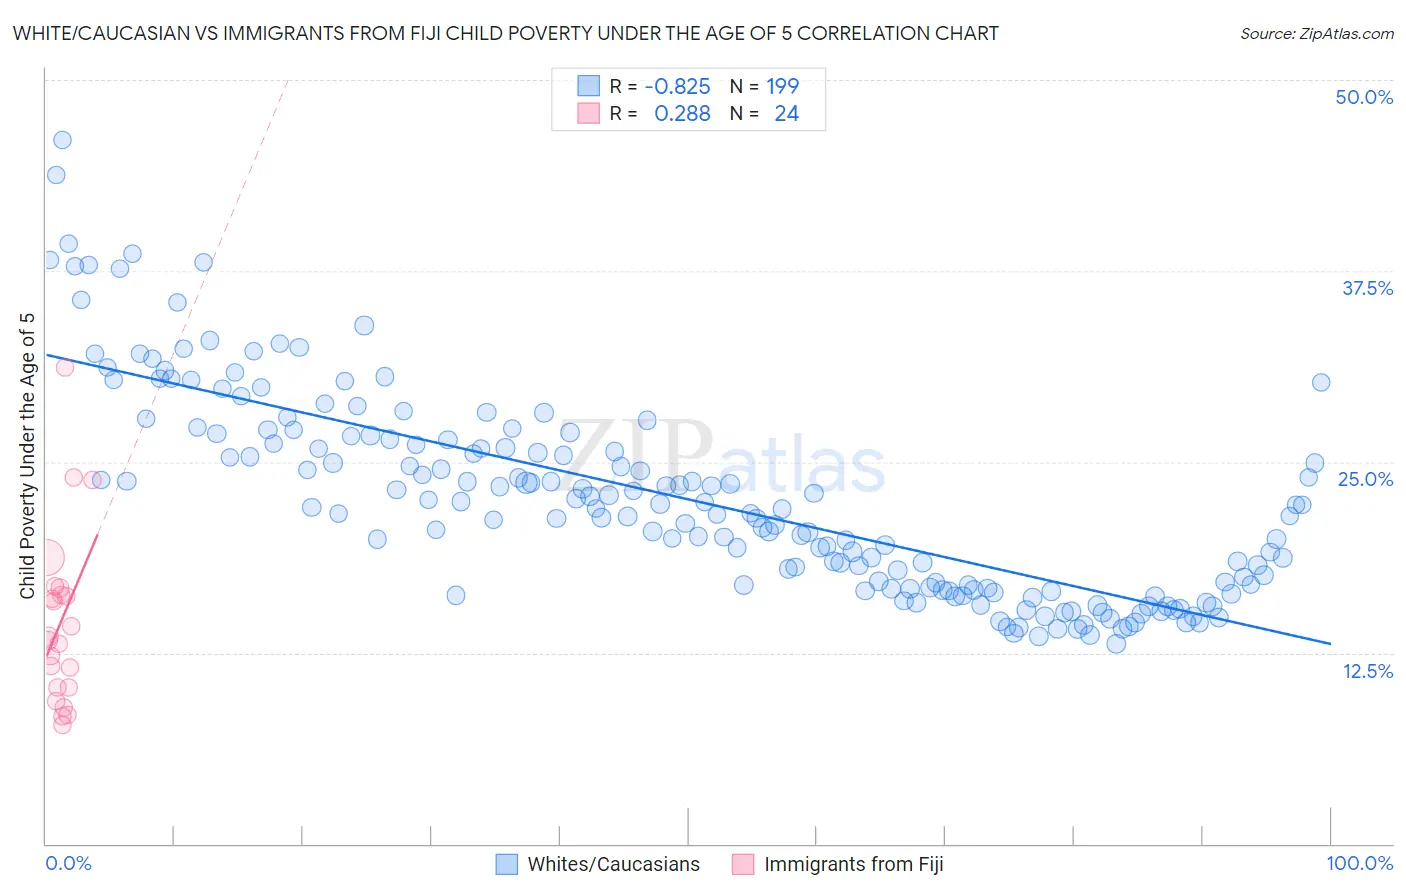 White/Caucasian vs Immigrants from Fiji Child Poverty Under the Age of 5